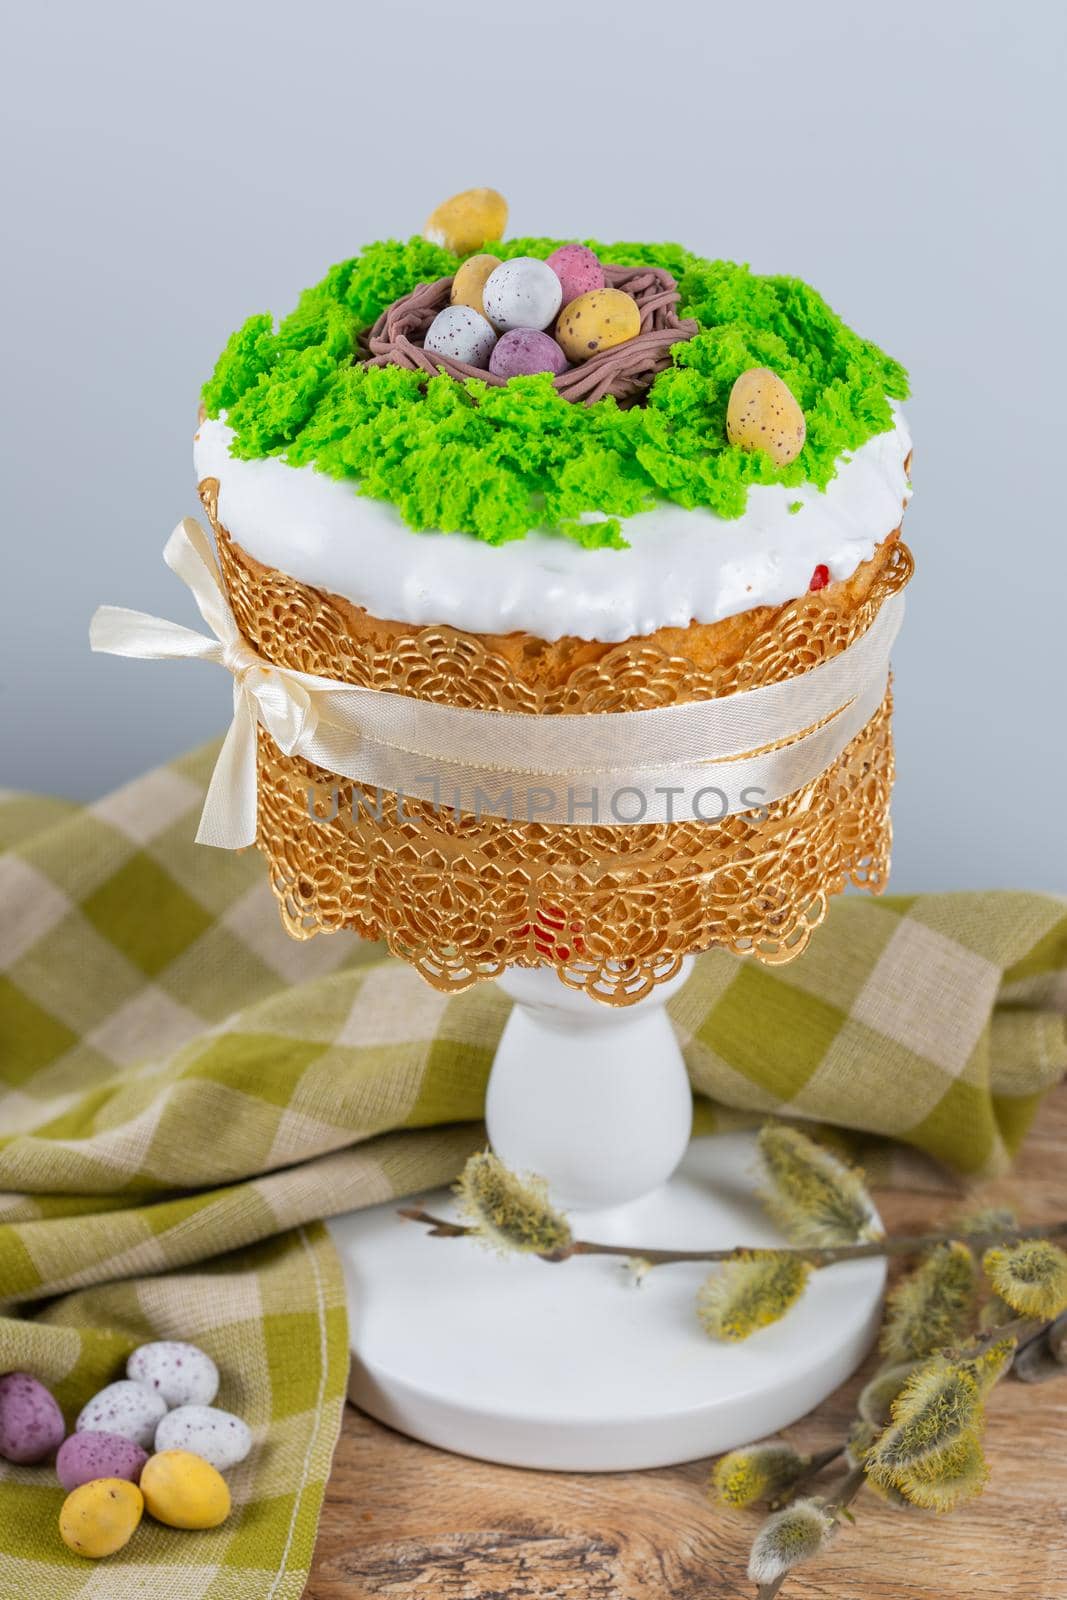 Easter cake made from yeast dough, decorated with edible moss with a nest and chocolate eggs. Easter composition on wooden table with green tablecloth